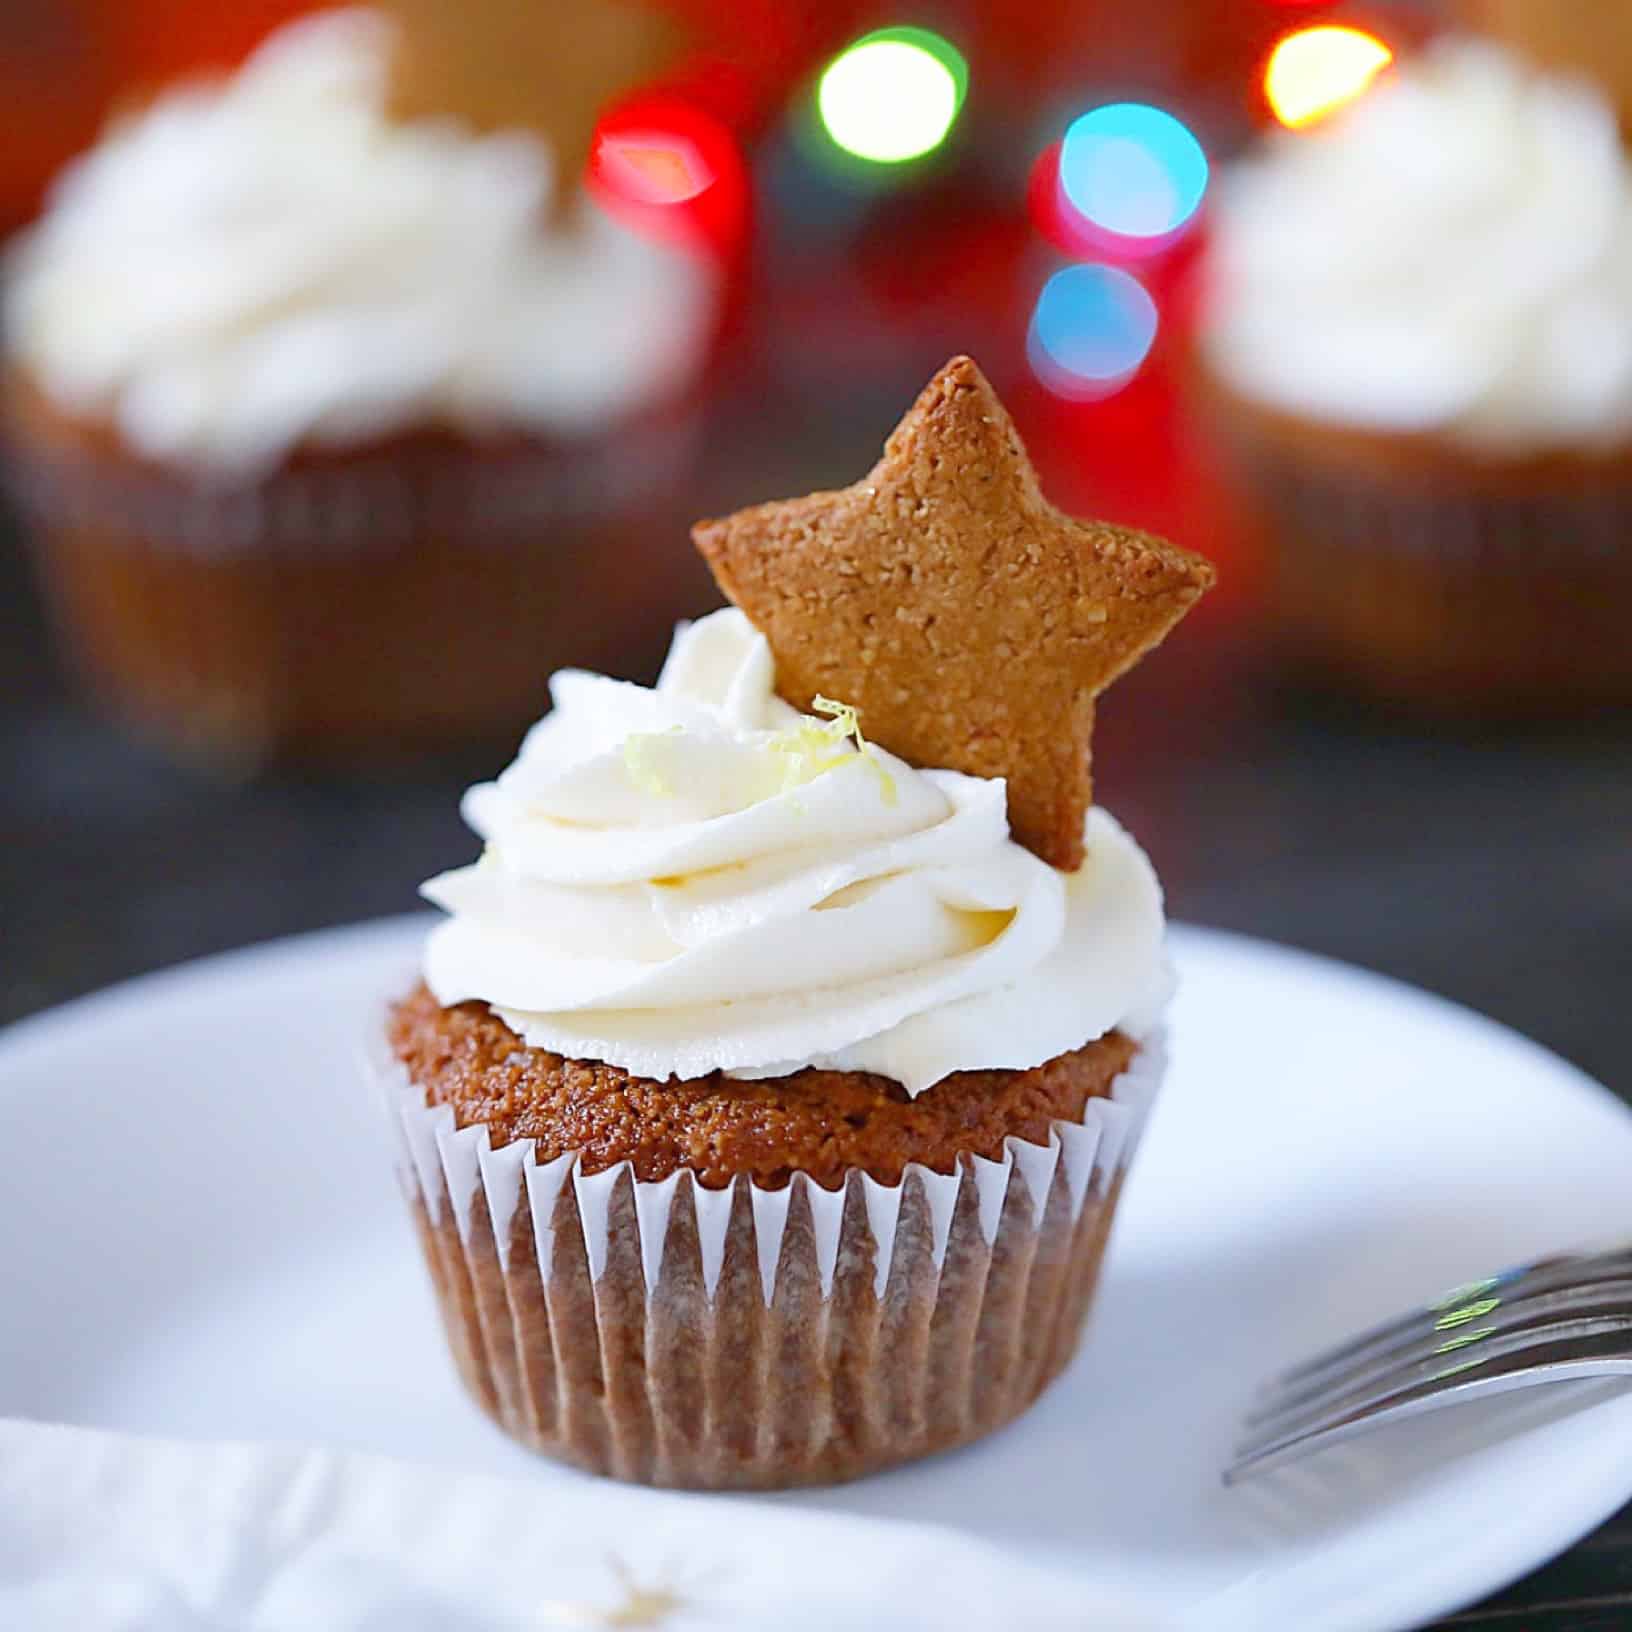 SCD Gingerbread Cupcakes With Lemon “Cream Cheese” Frosting